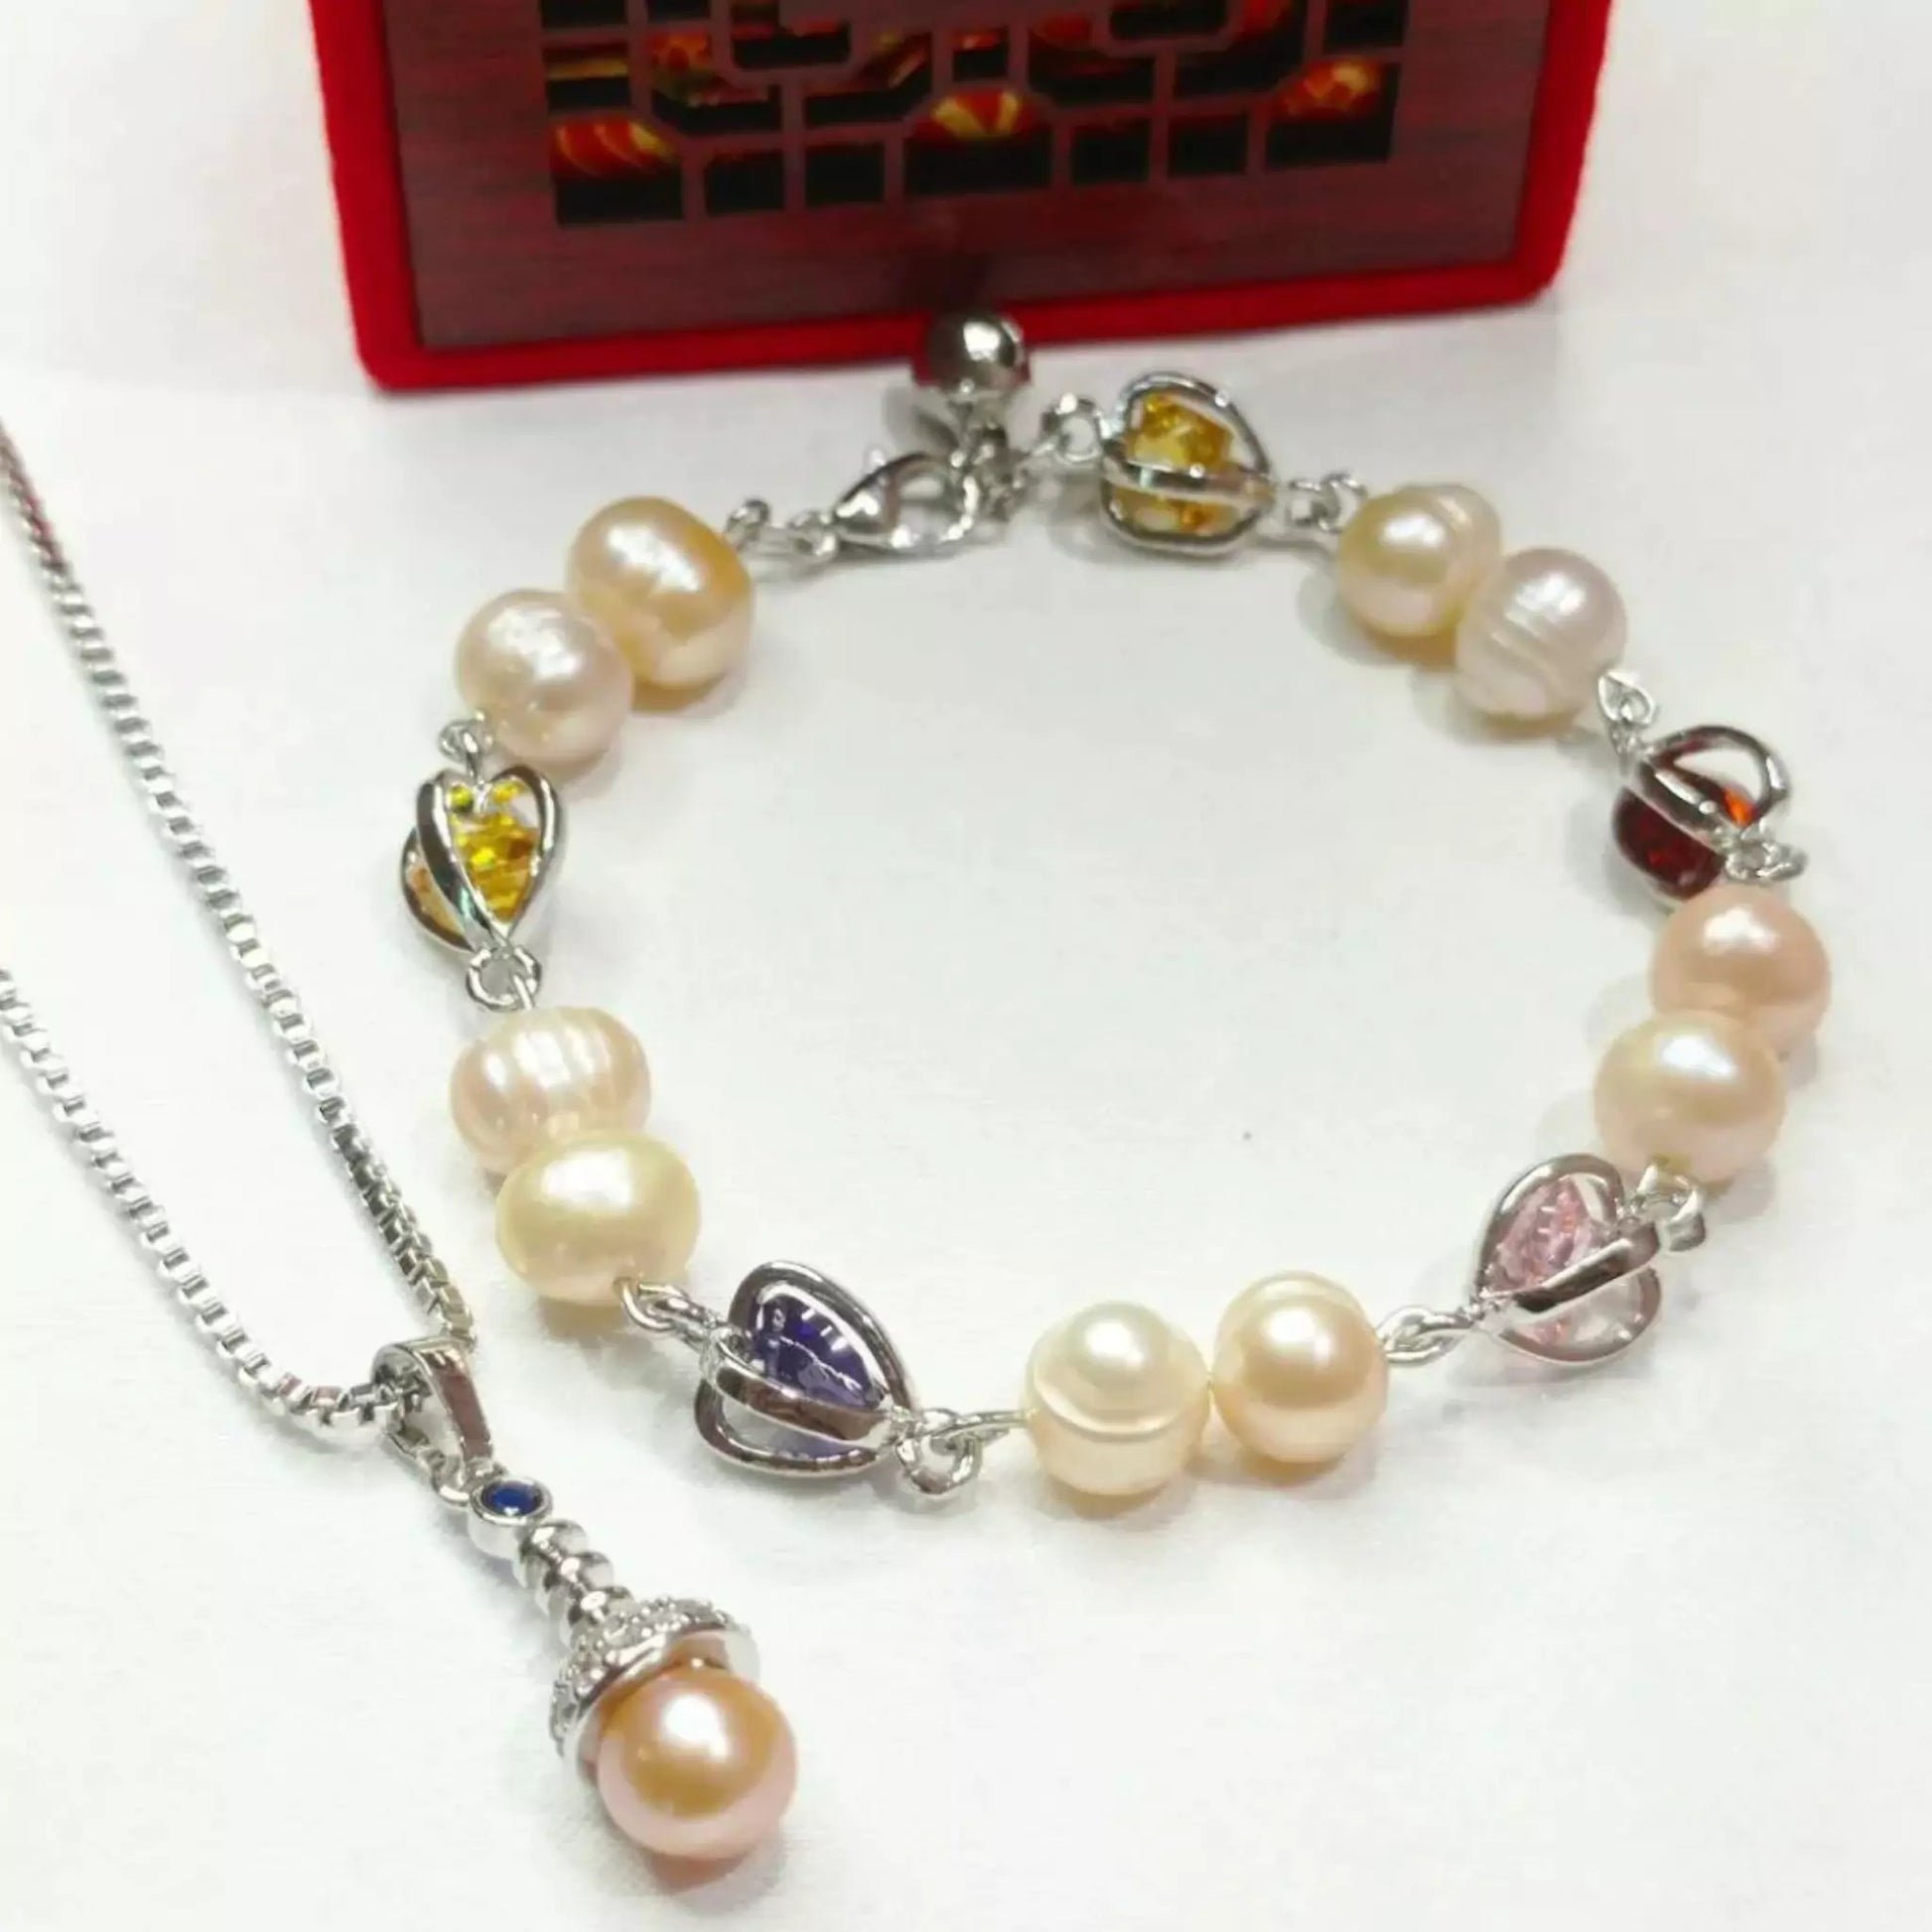 Super Quality Pearl Packages (Bracelets and Necklaces) For Sale